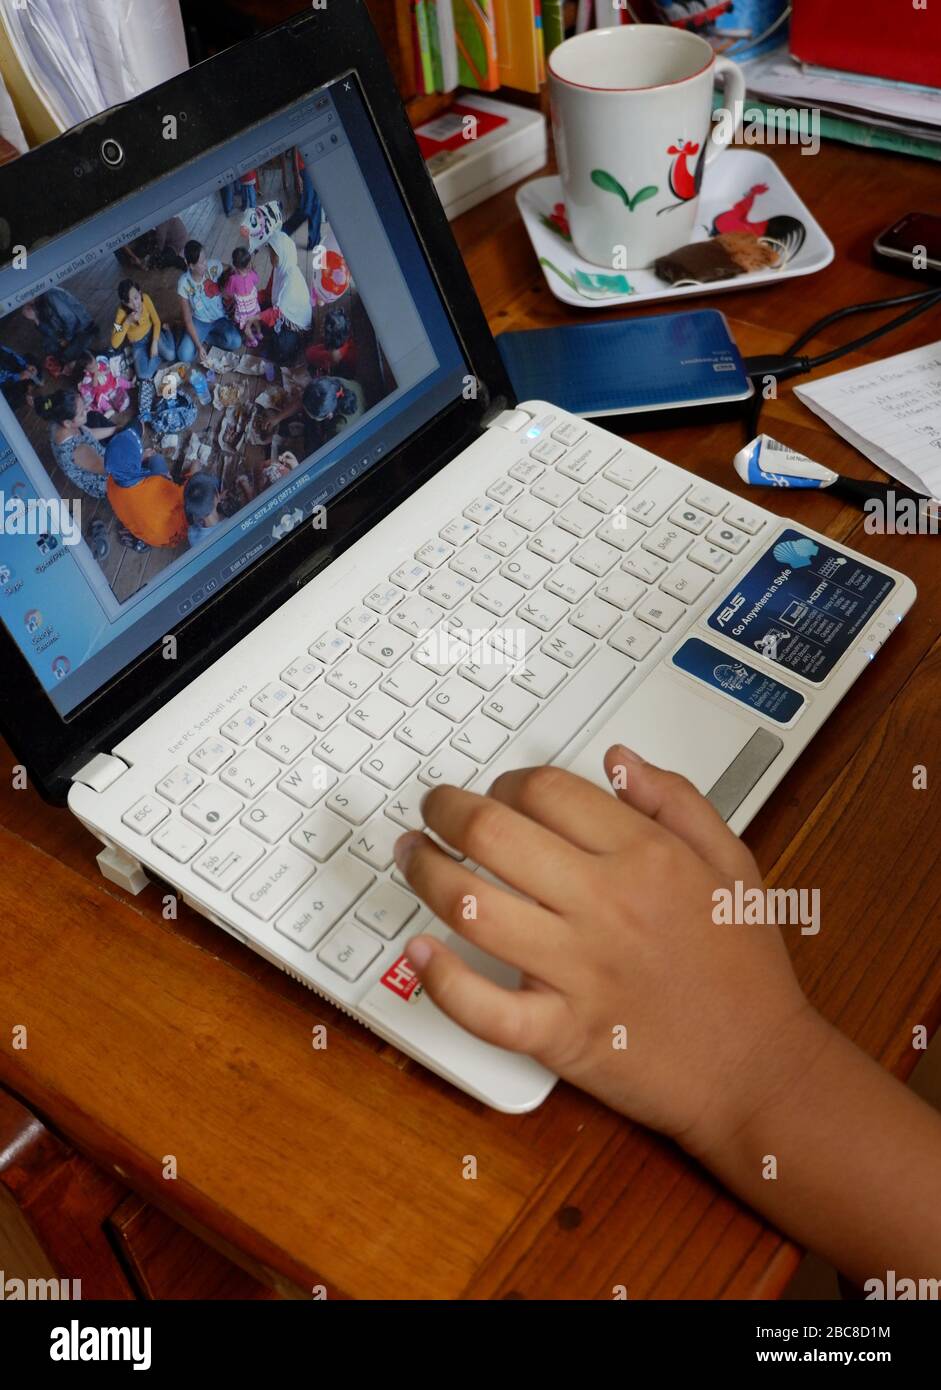 A close up shot of a person's hand that edit a photo with a laptop, an external harddisk and a cup of coffee. Ready to work remotely at home. Stock Photo